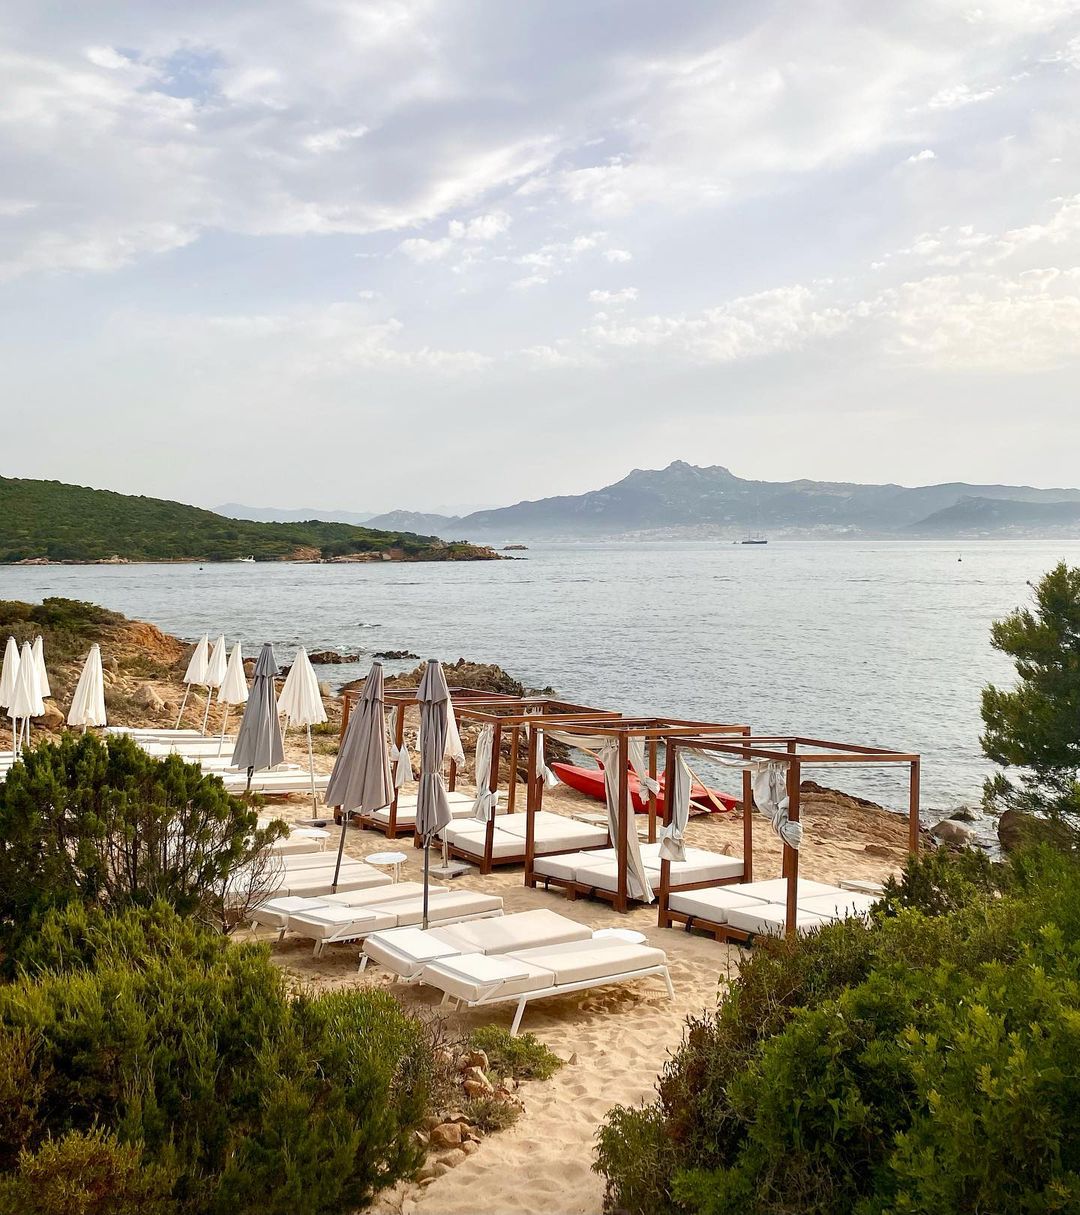 A stunning seaside location, with exquisite beach cuisine and fine drinks at Cone Club - Sardinia - Top 10 Beach Bars